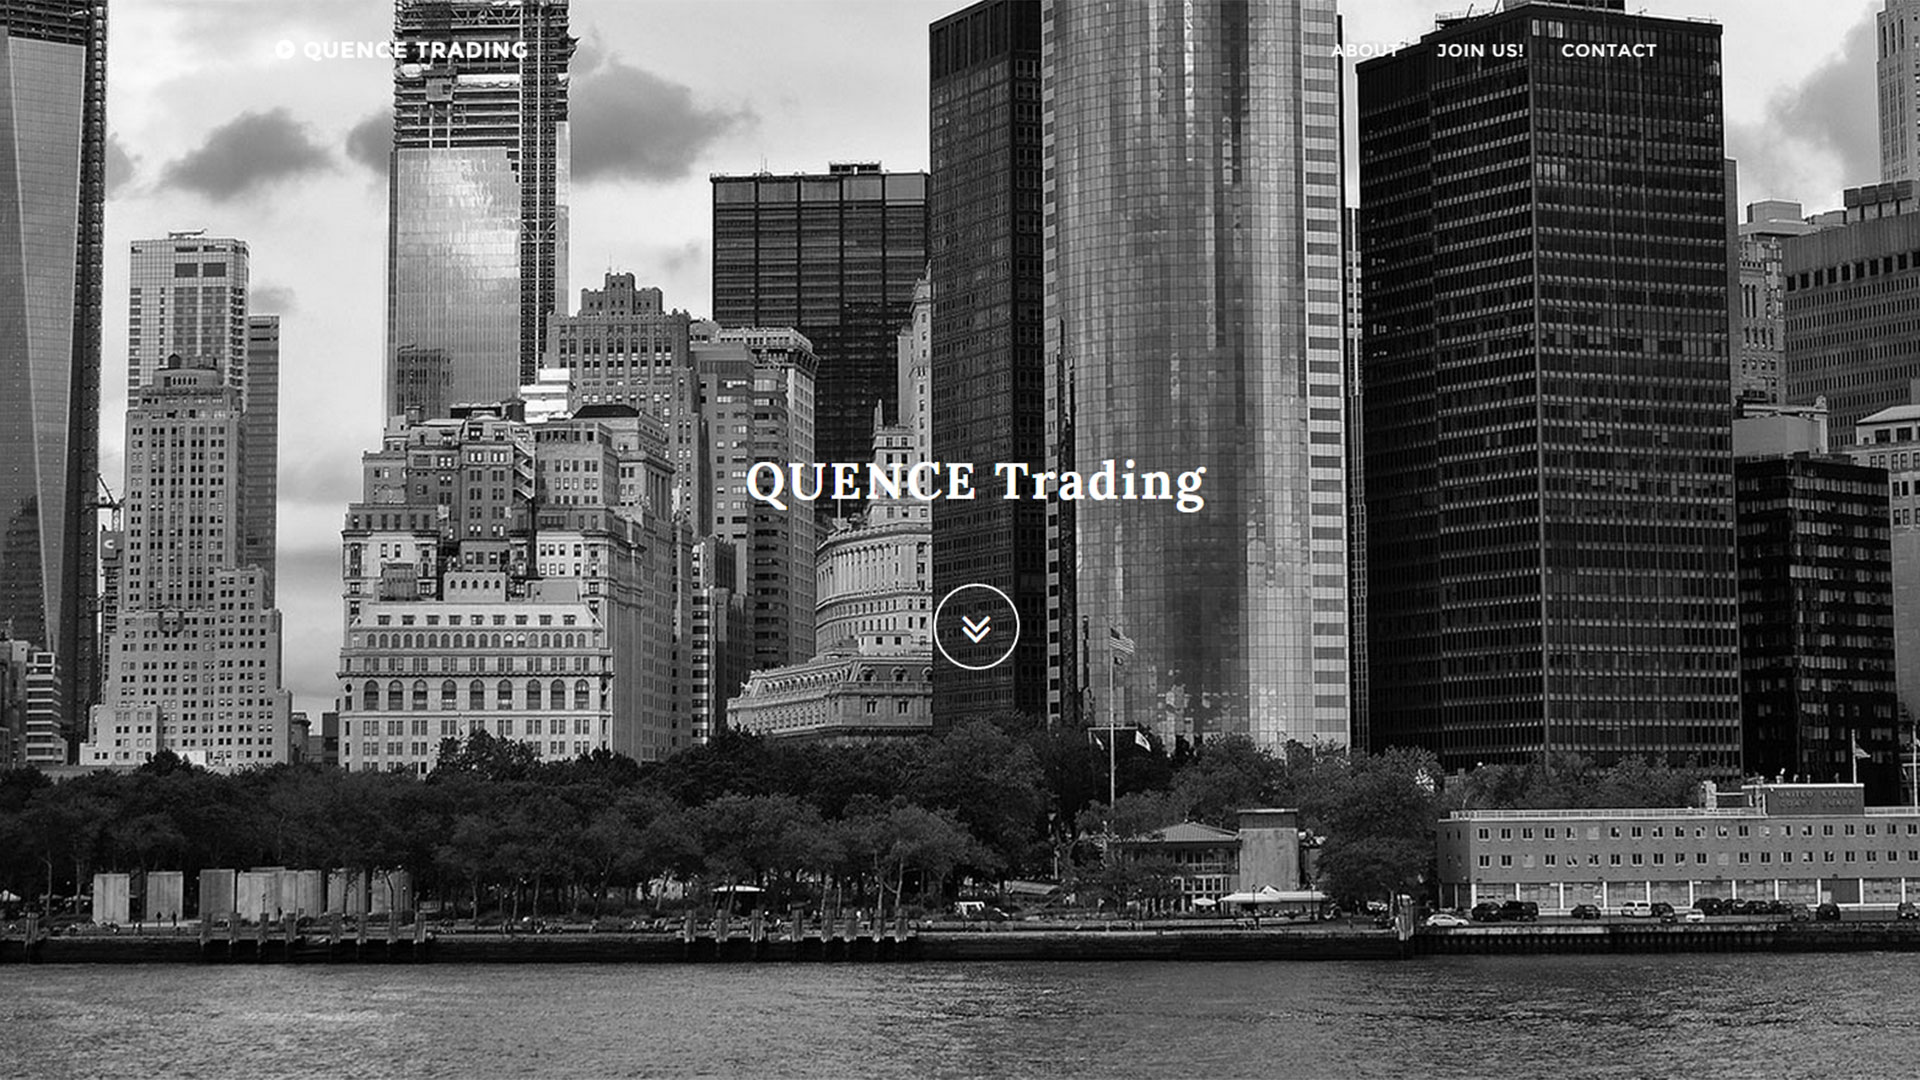 Quence Trading